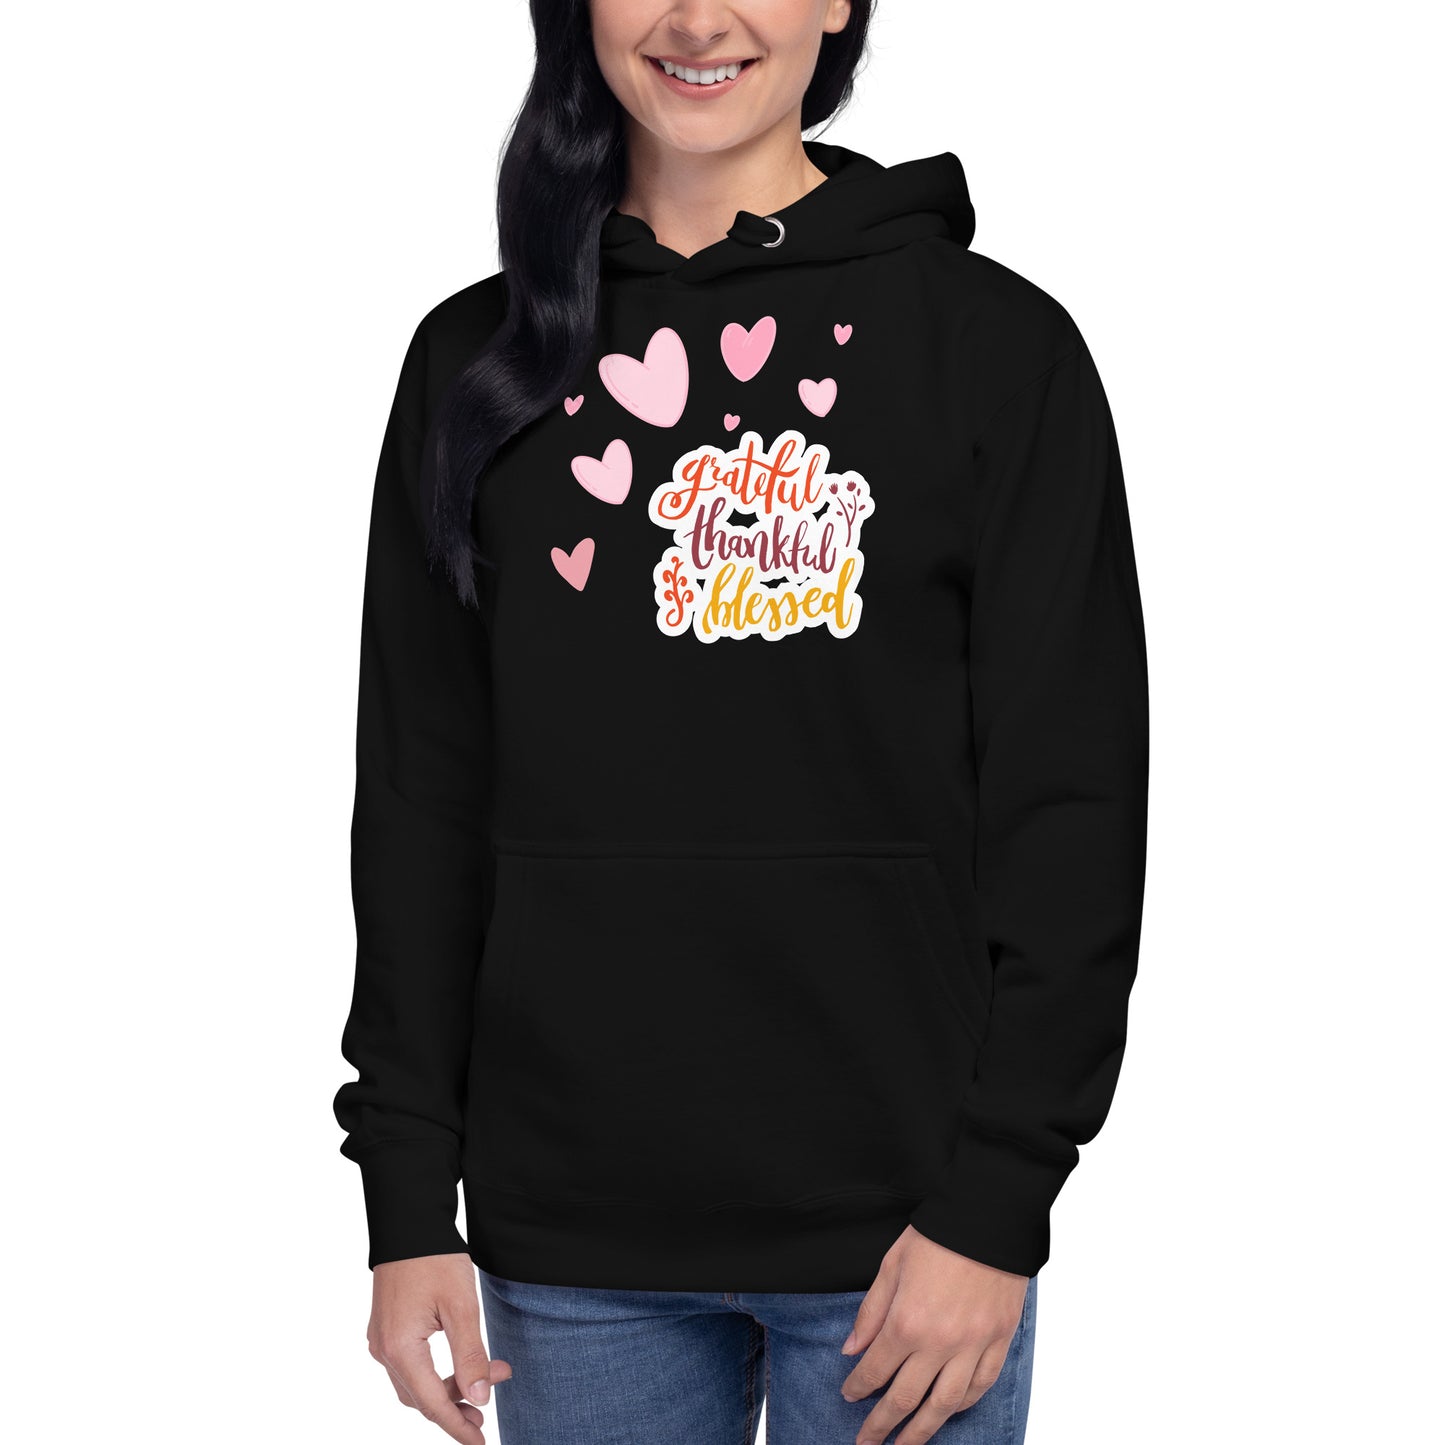 Grateful, Thankful And Blessed Unisex Hoodie